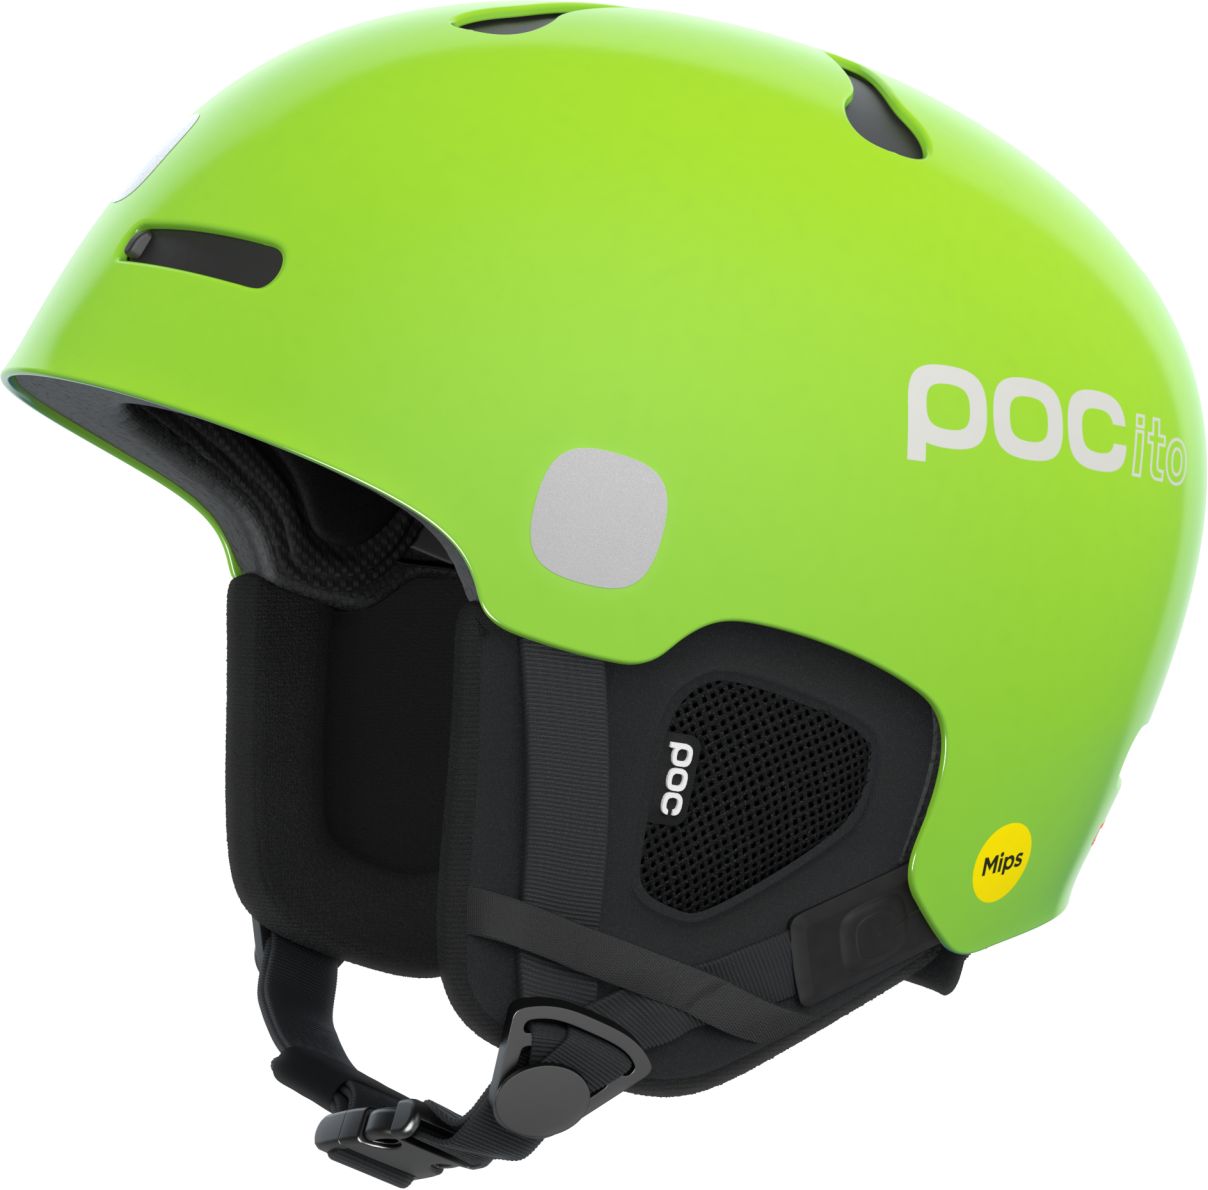 POC POCito Auric Cut MIPS - Fluorescent Yellow/Green 51-54